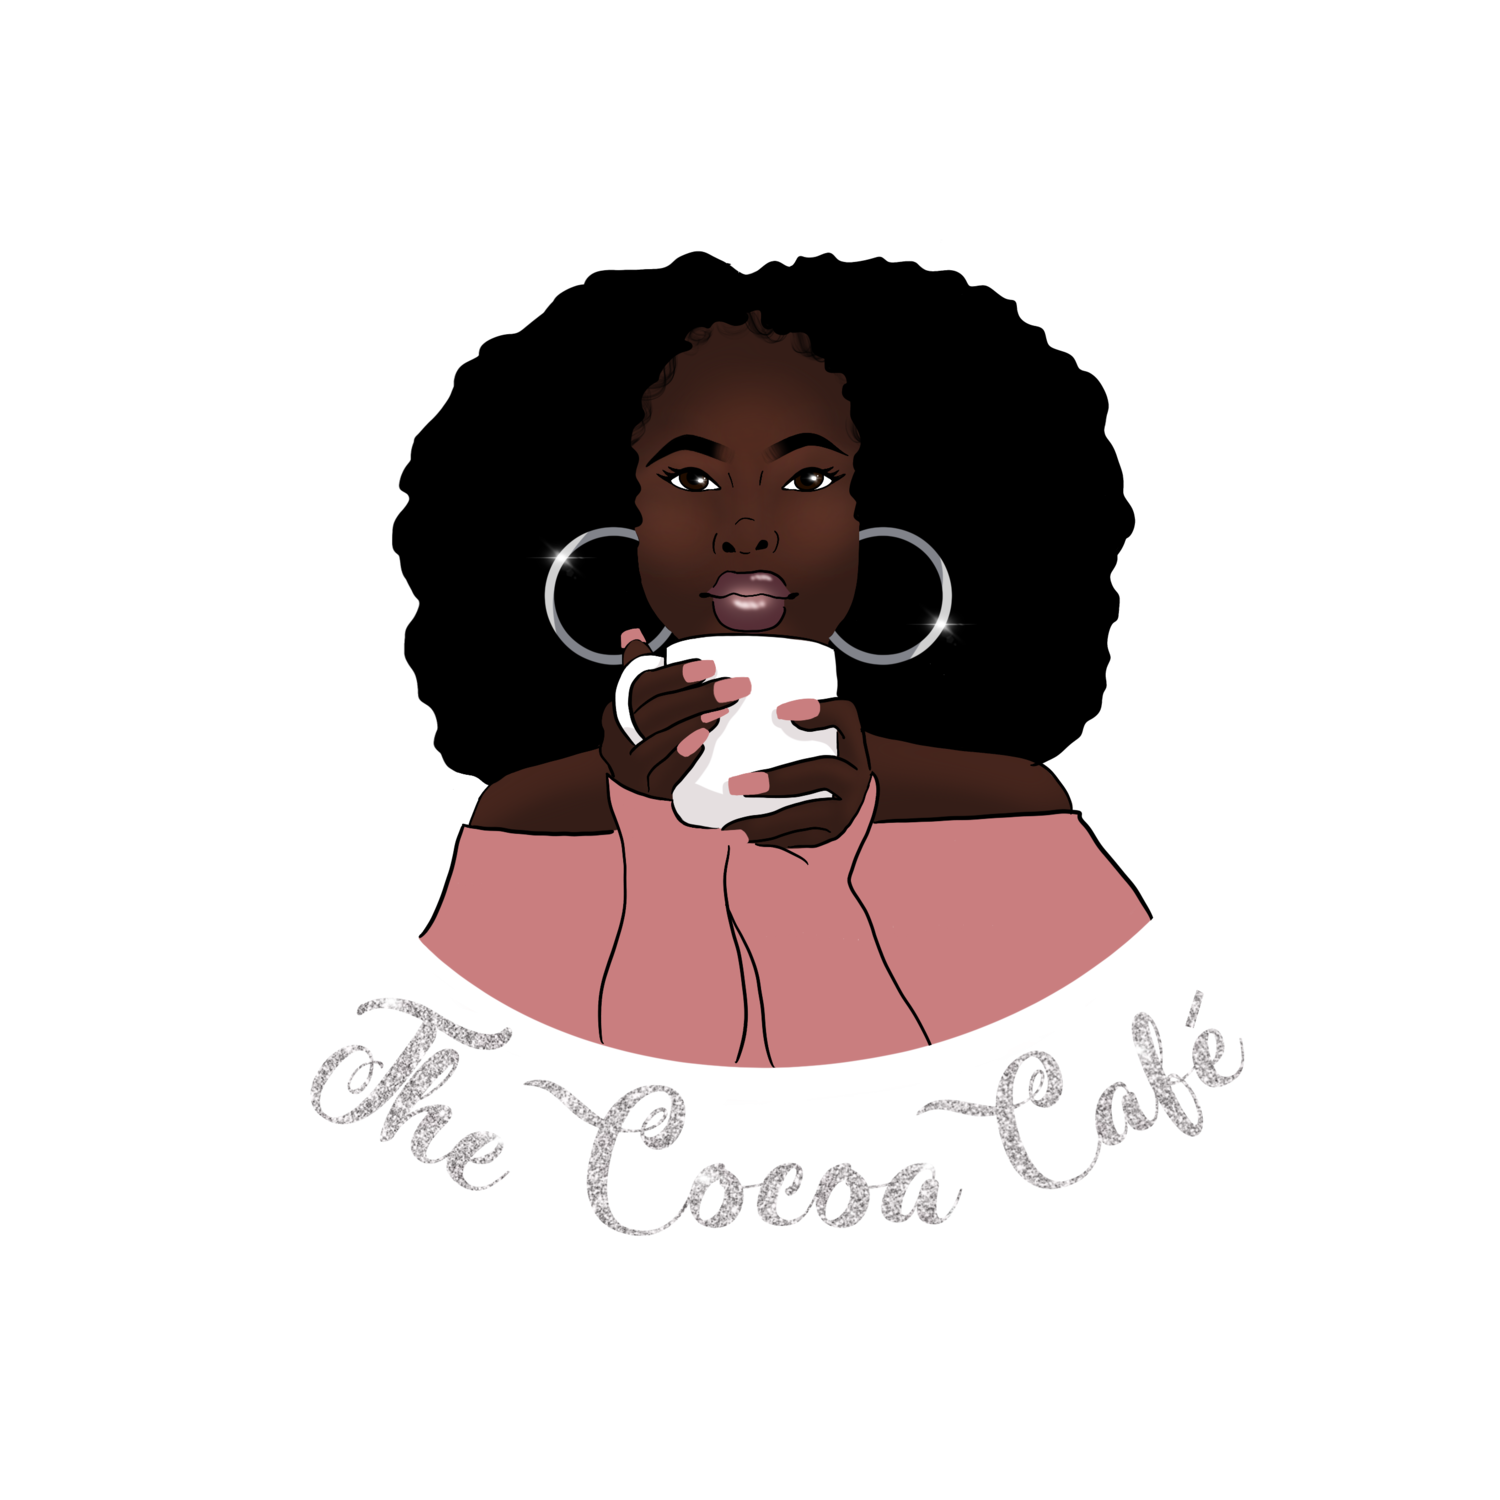 The Cocoa Cafe